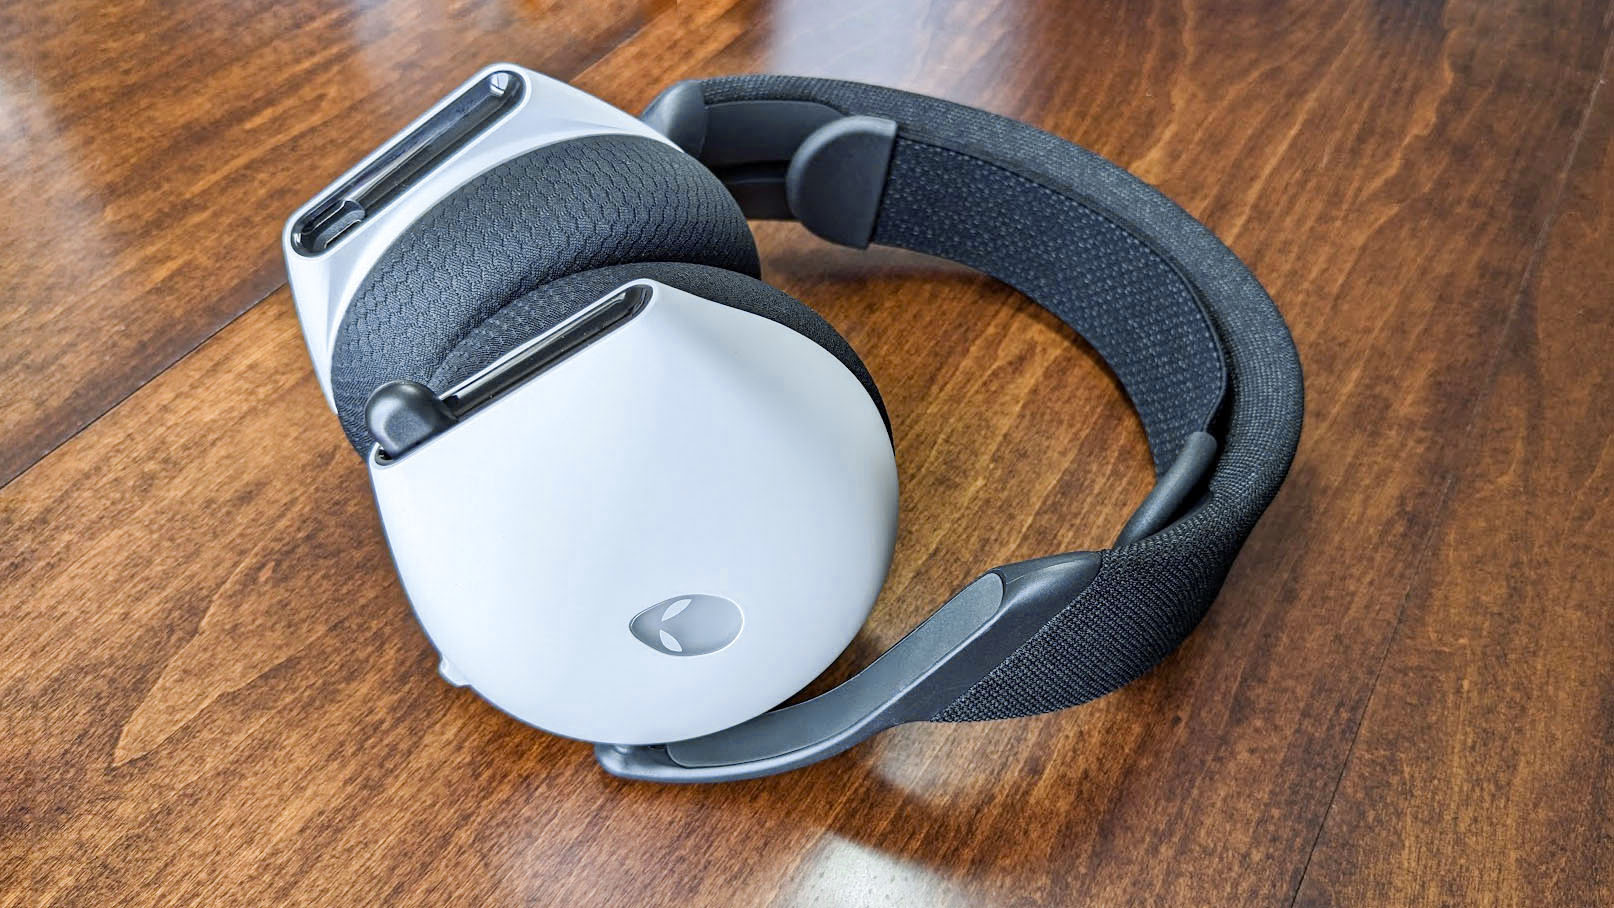 Review: Alienware 720H Dual-Mode Wireless Gaming Headset would be perfect if not for one glaring issue